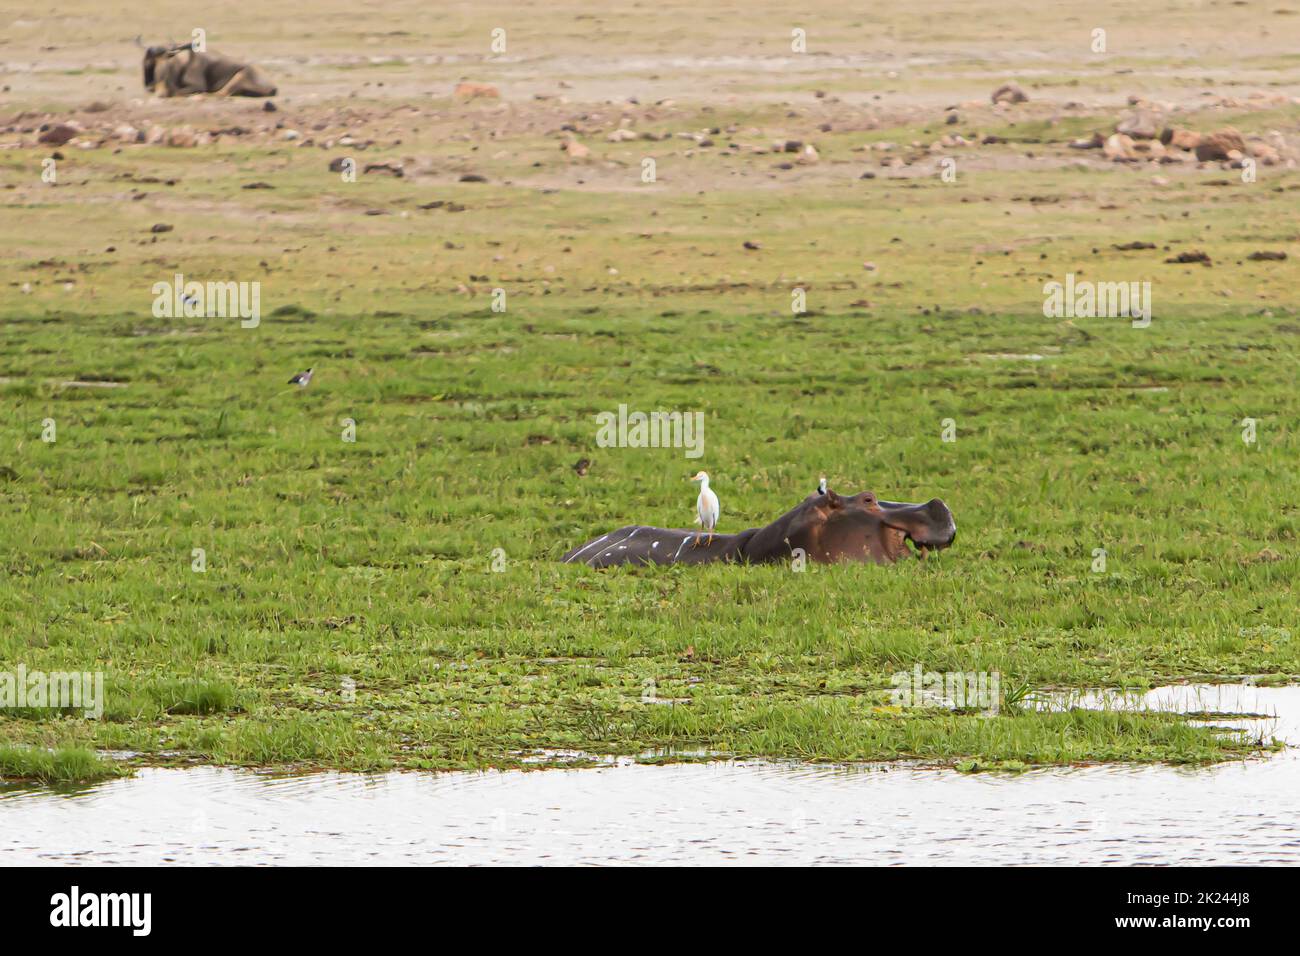 Hippopotamus above water with a bird on the top, in Amboseli National Park, Kenya Stock Photo